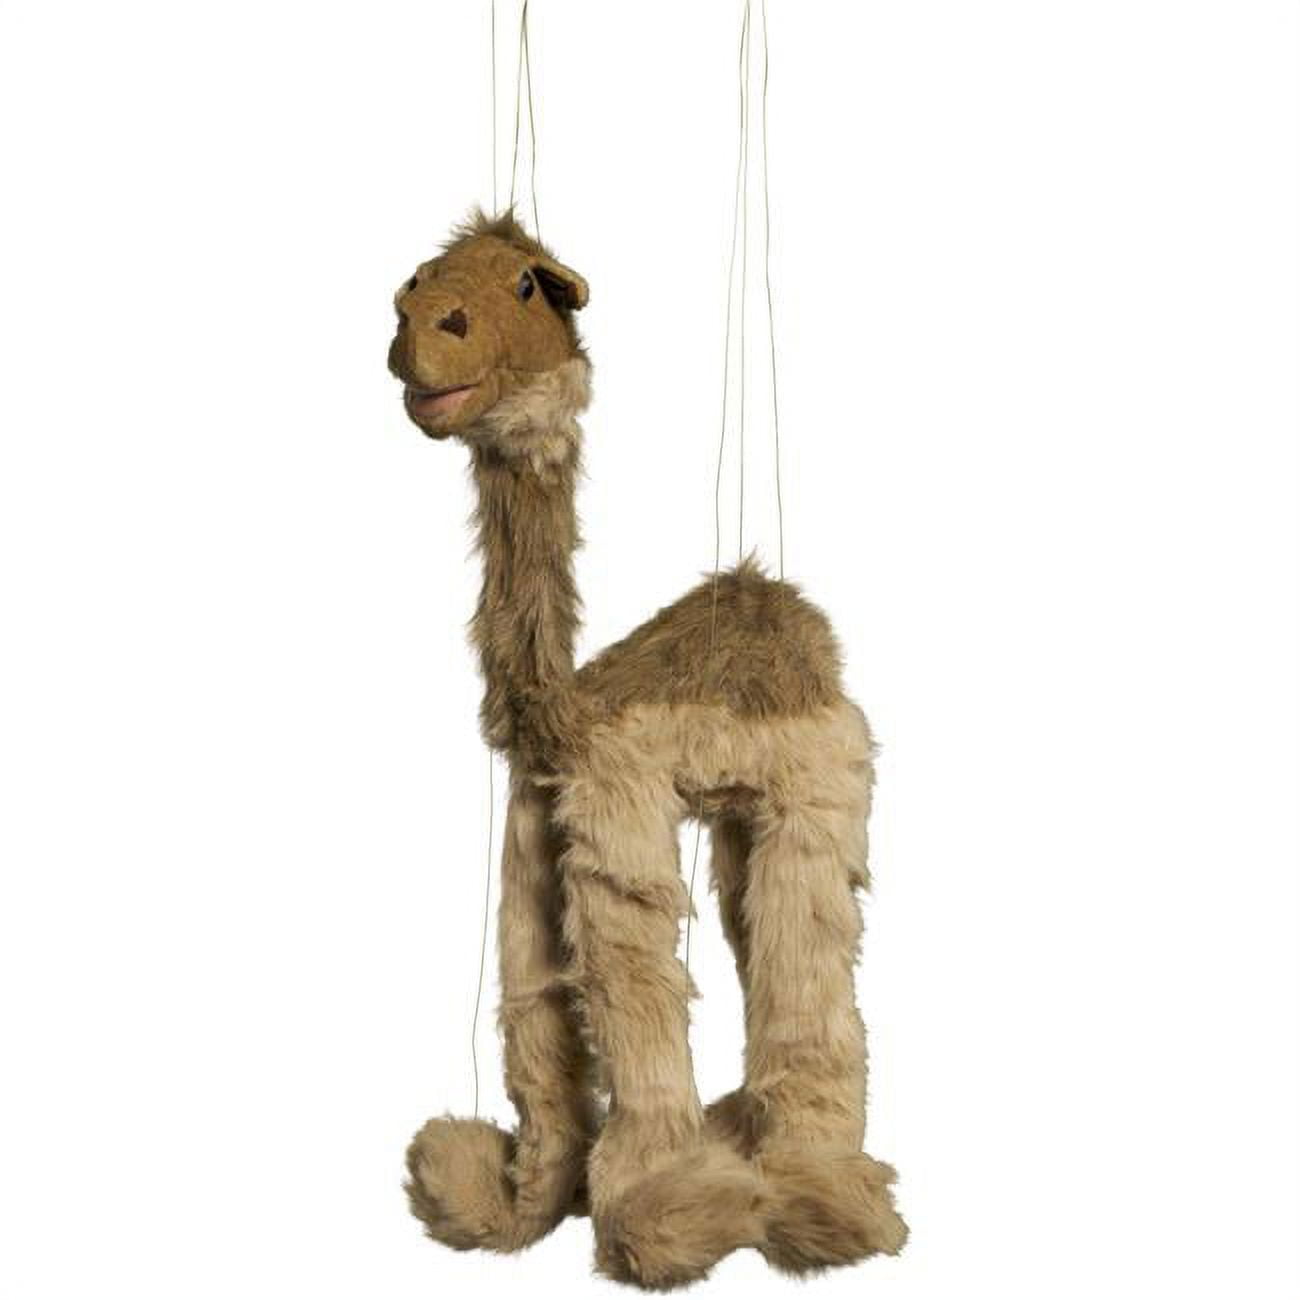 How To String a Marionette 